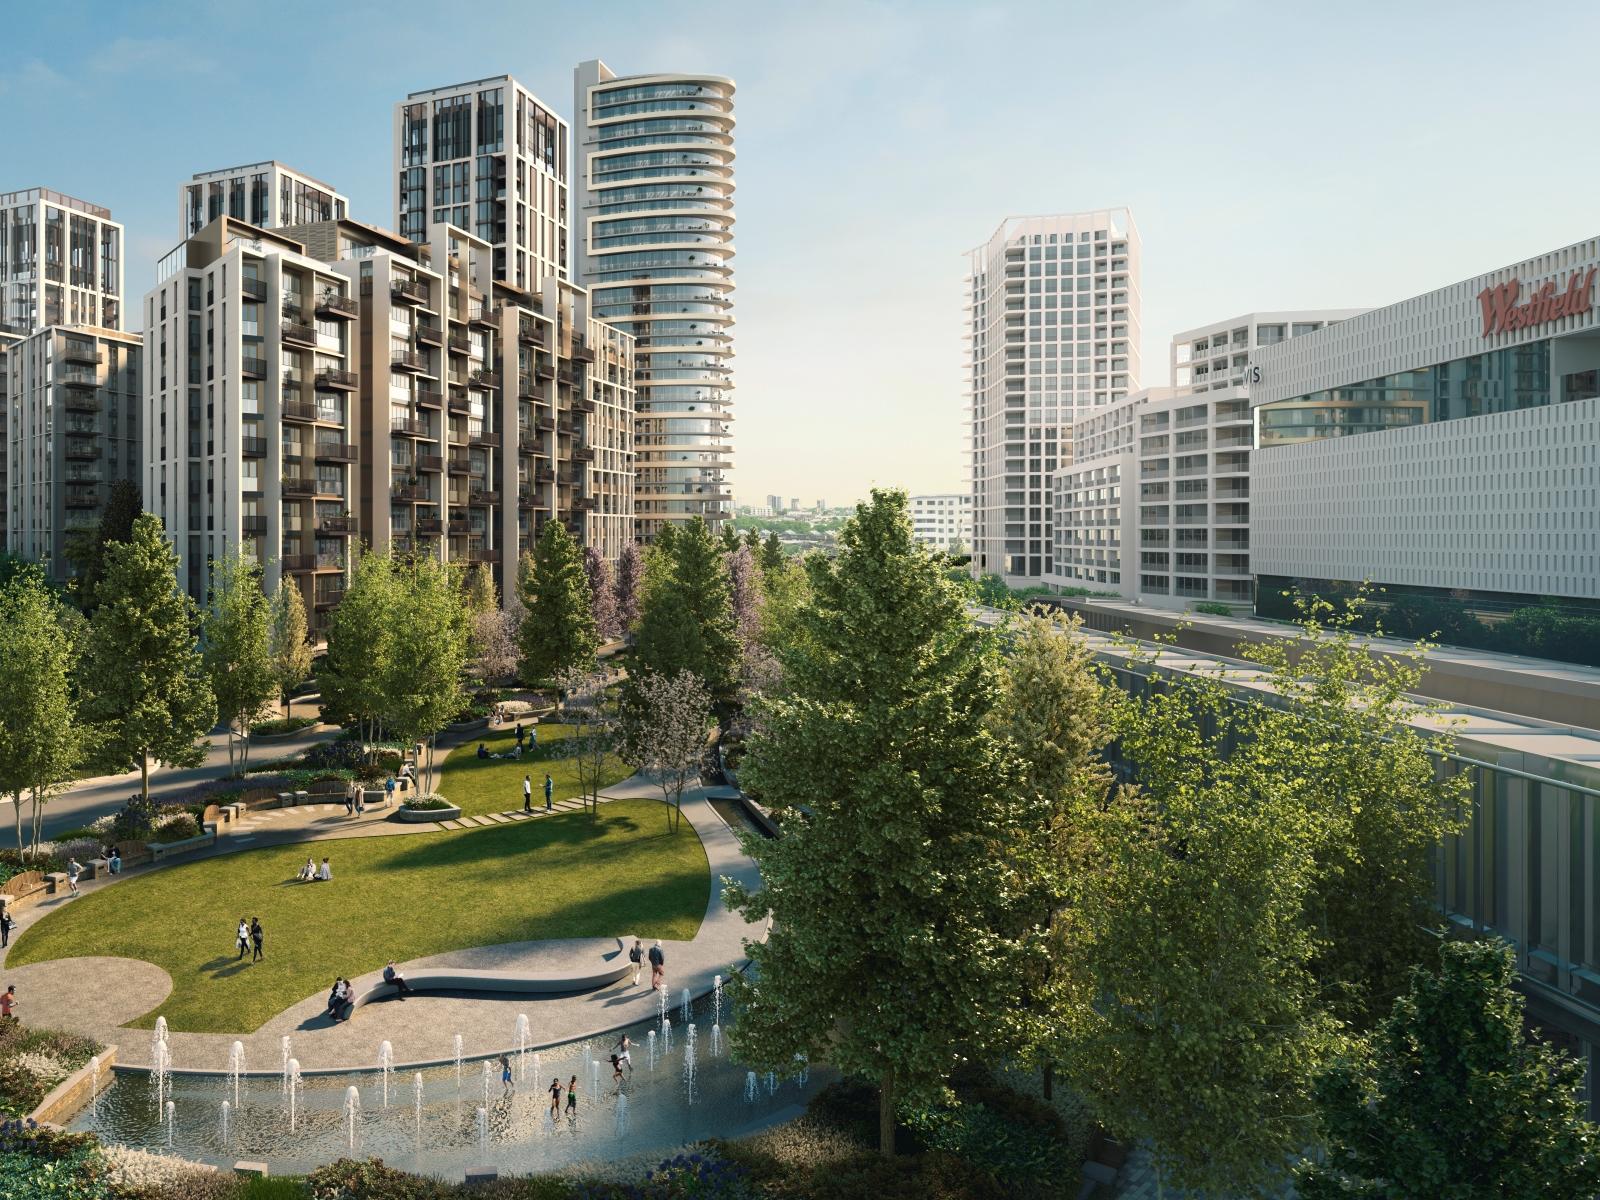 New Homes in Hammersmith and Fulham 2022